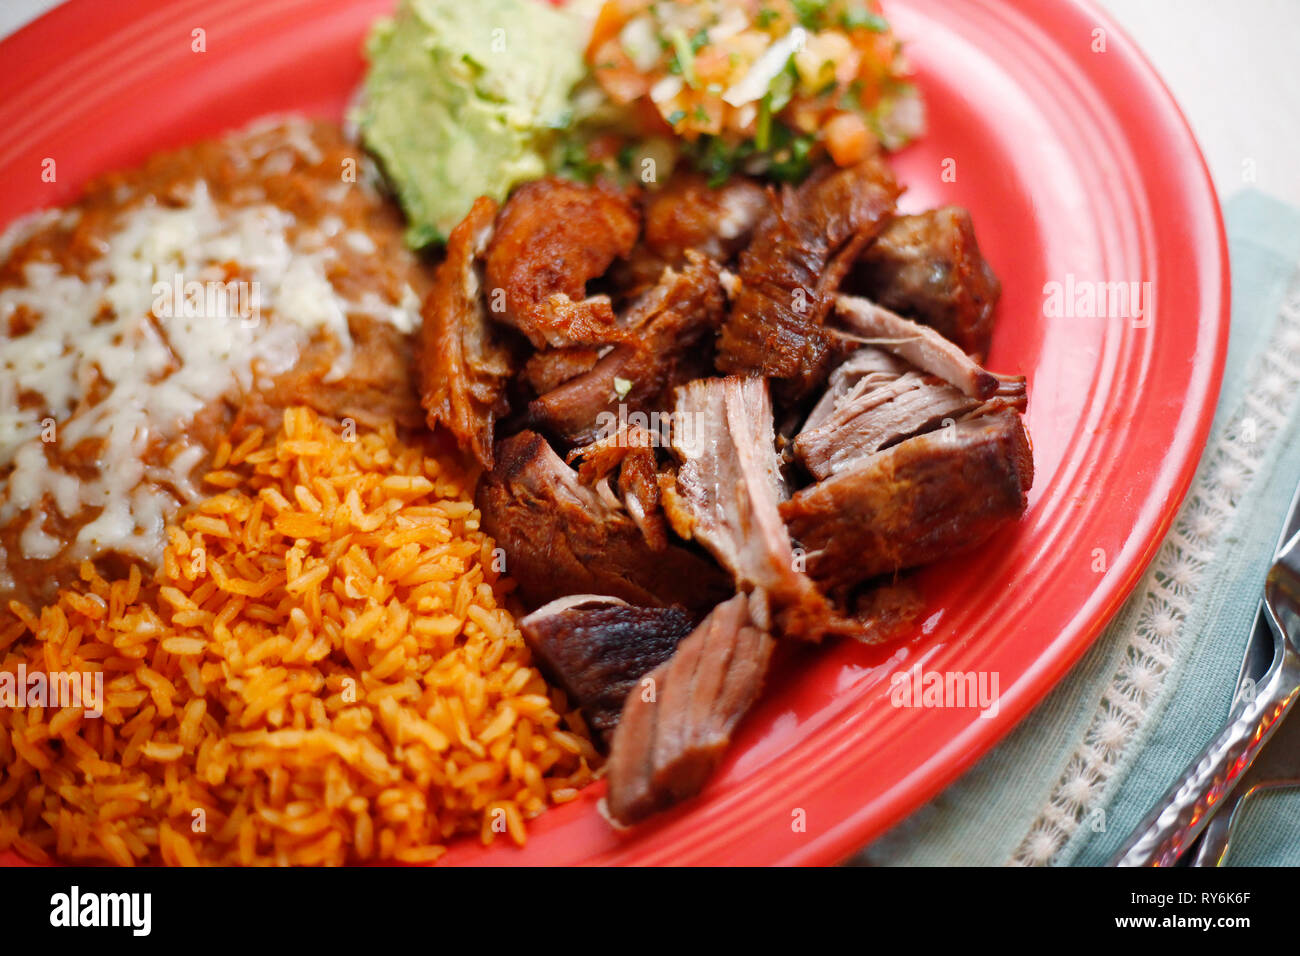 High angle view of rice with meat and salad served in plate on table Stock Photo